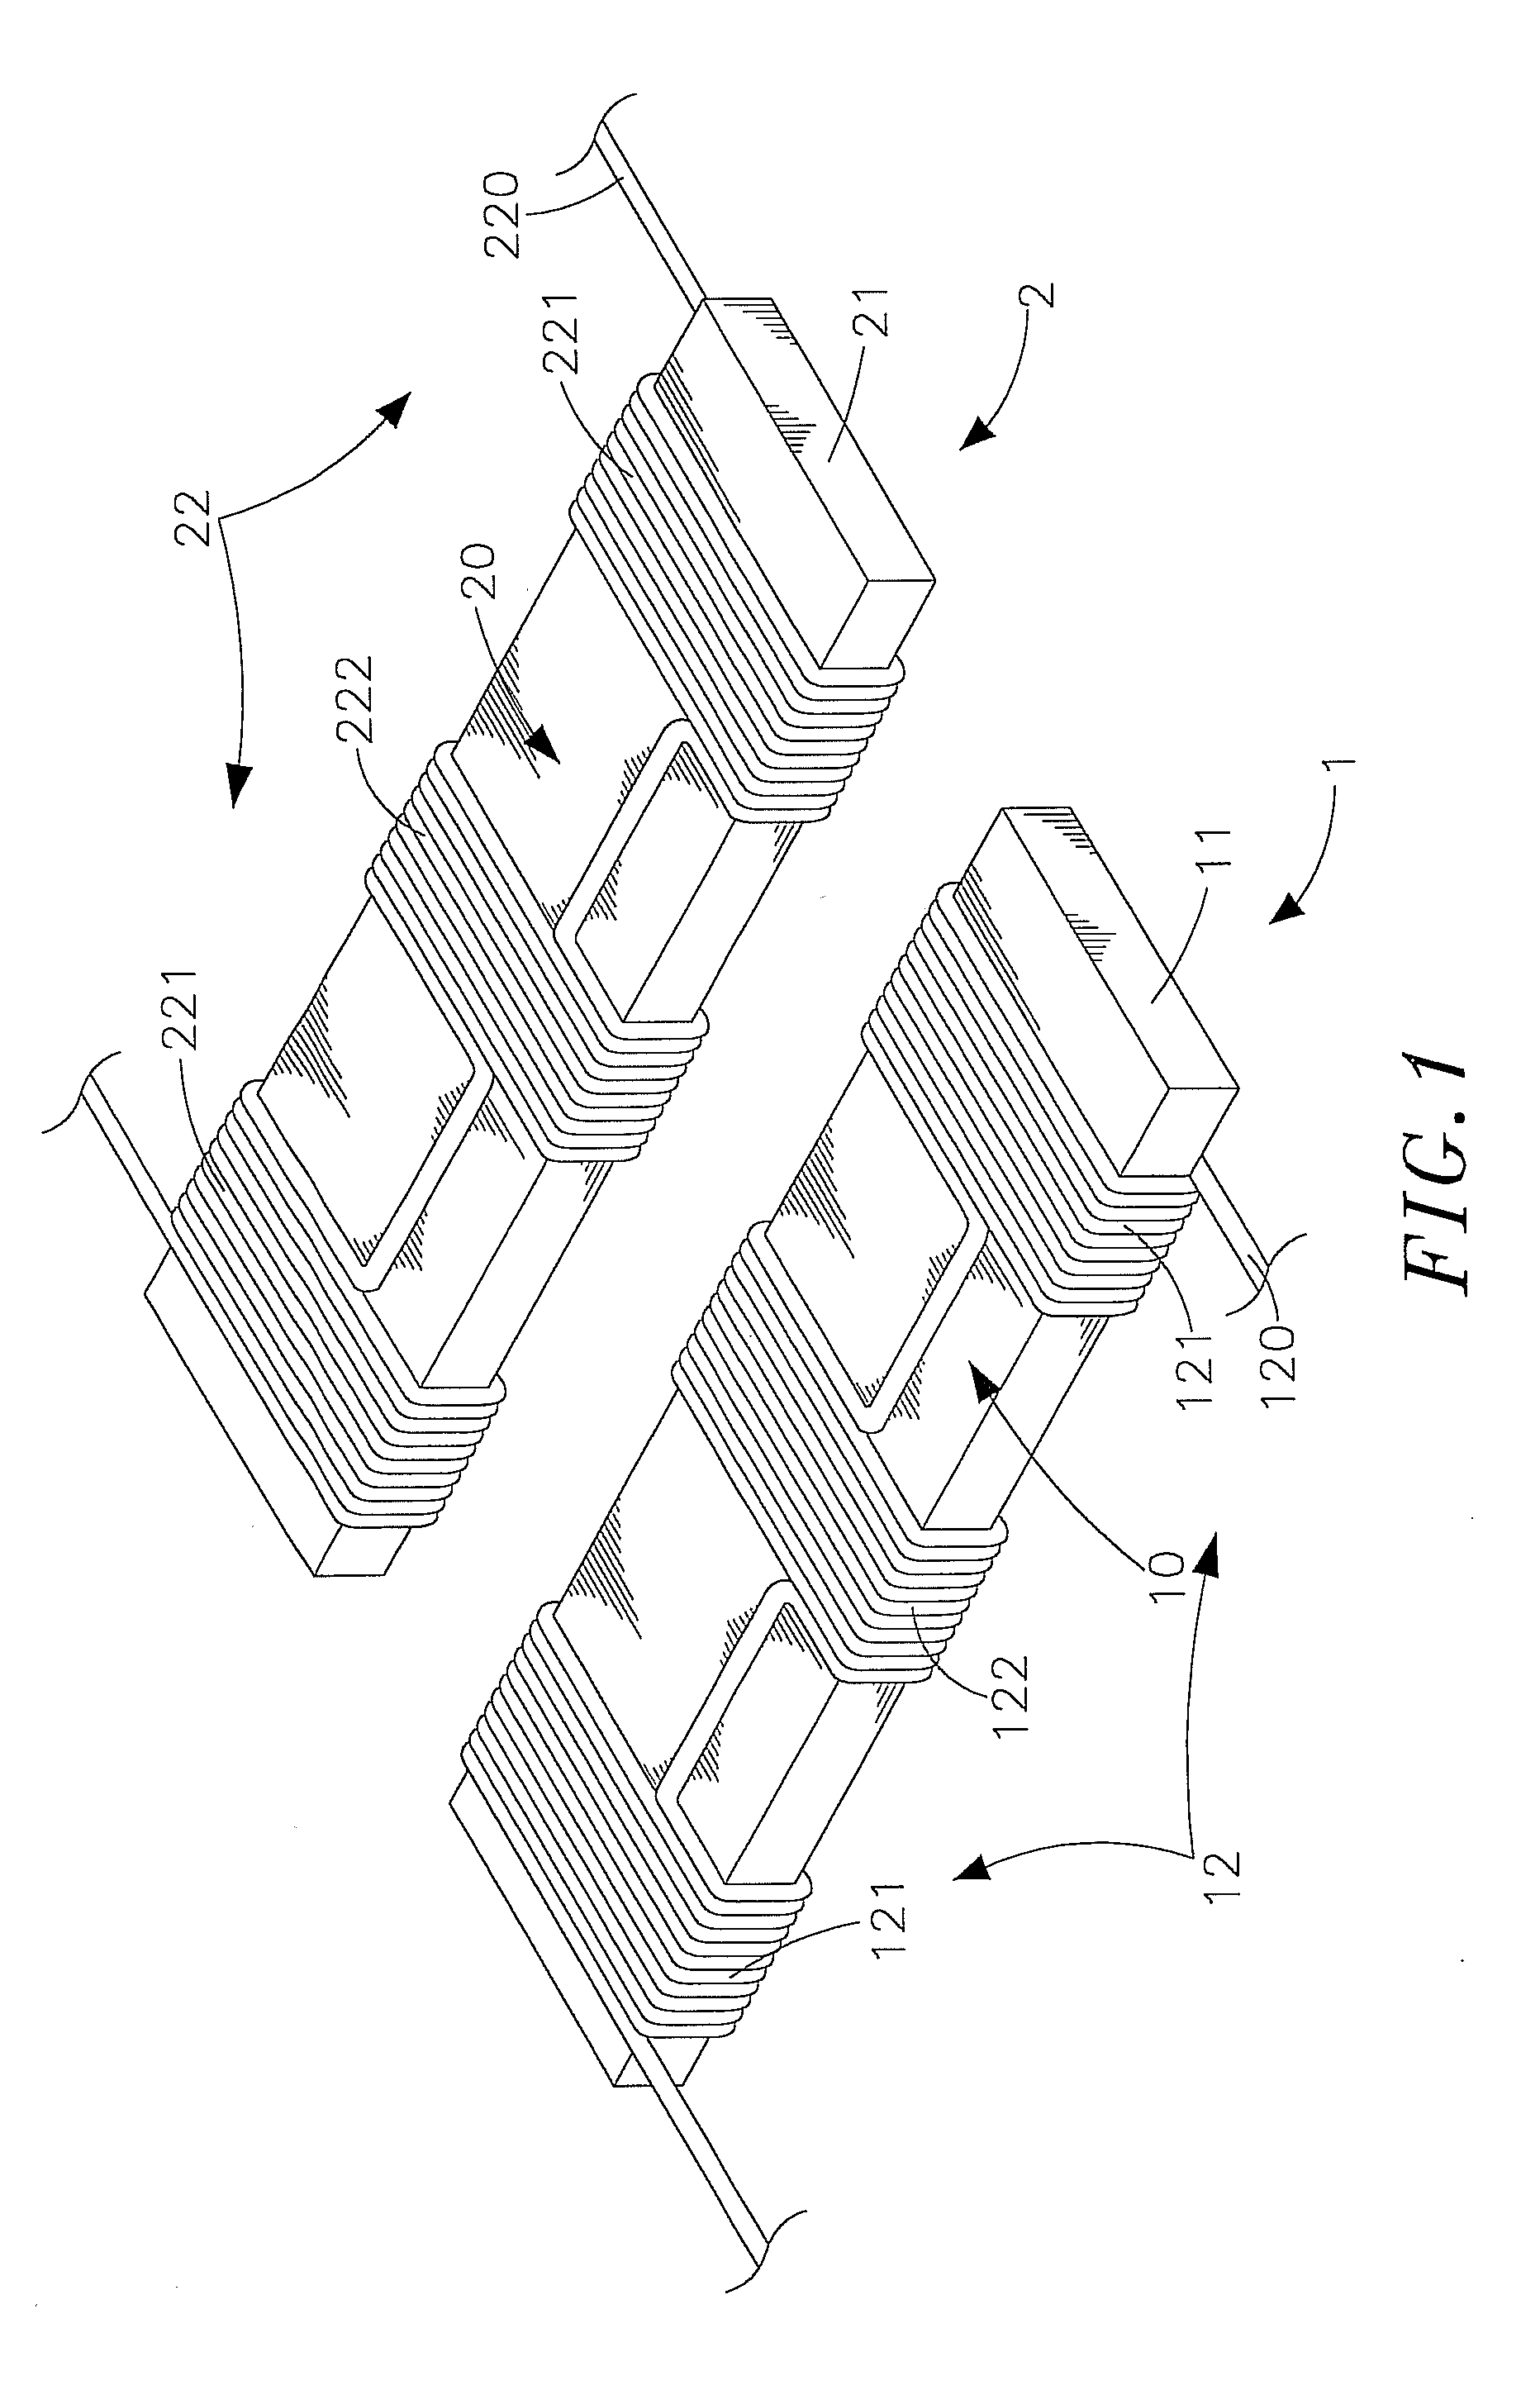 Wireless charging coil structure in electronic devices